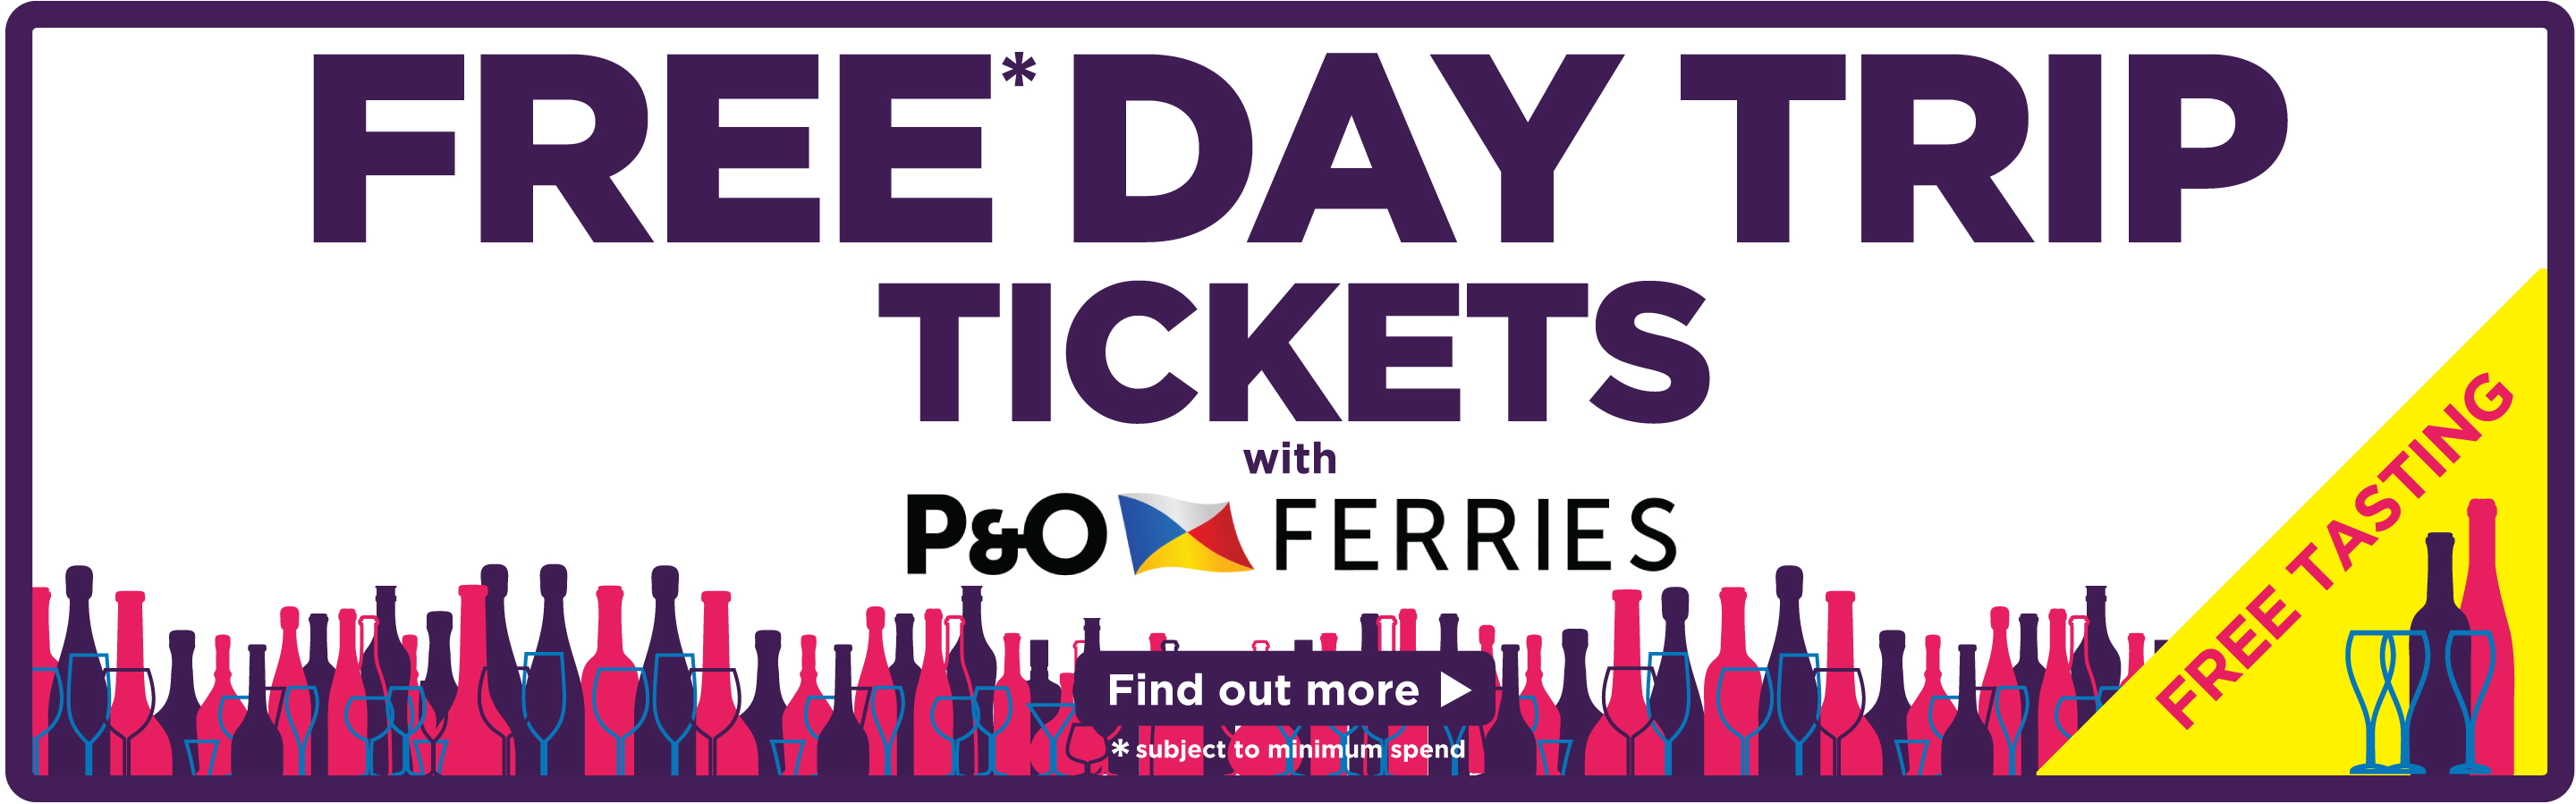 FREE-DAY-TRIP-TICKETS-HP